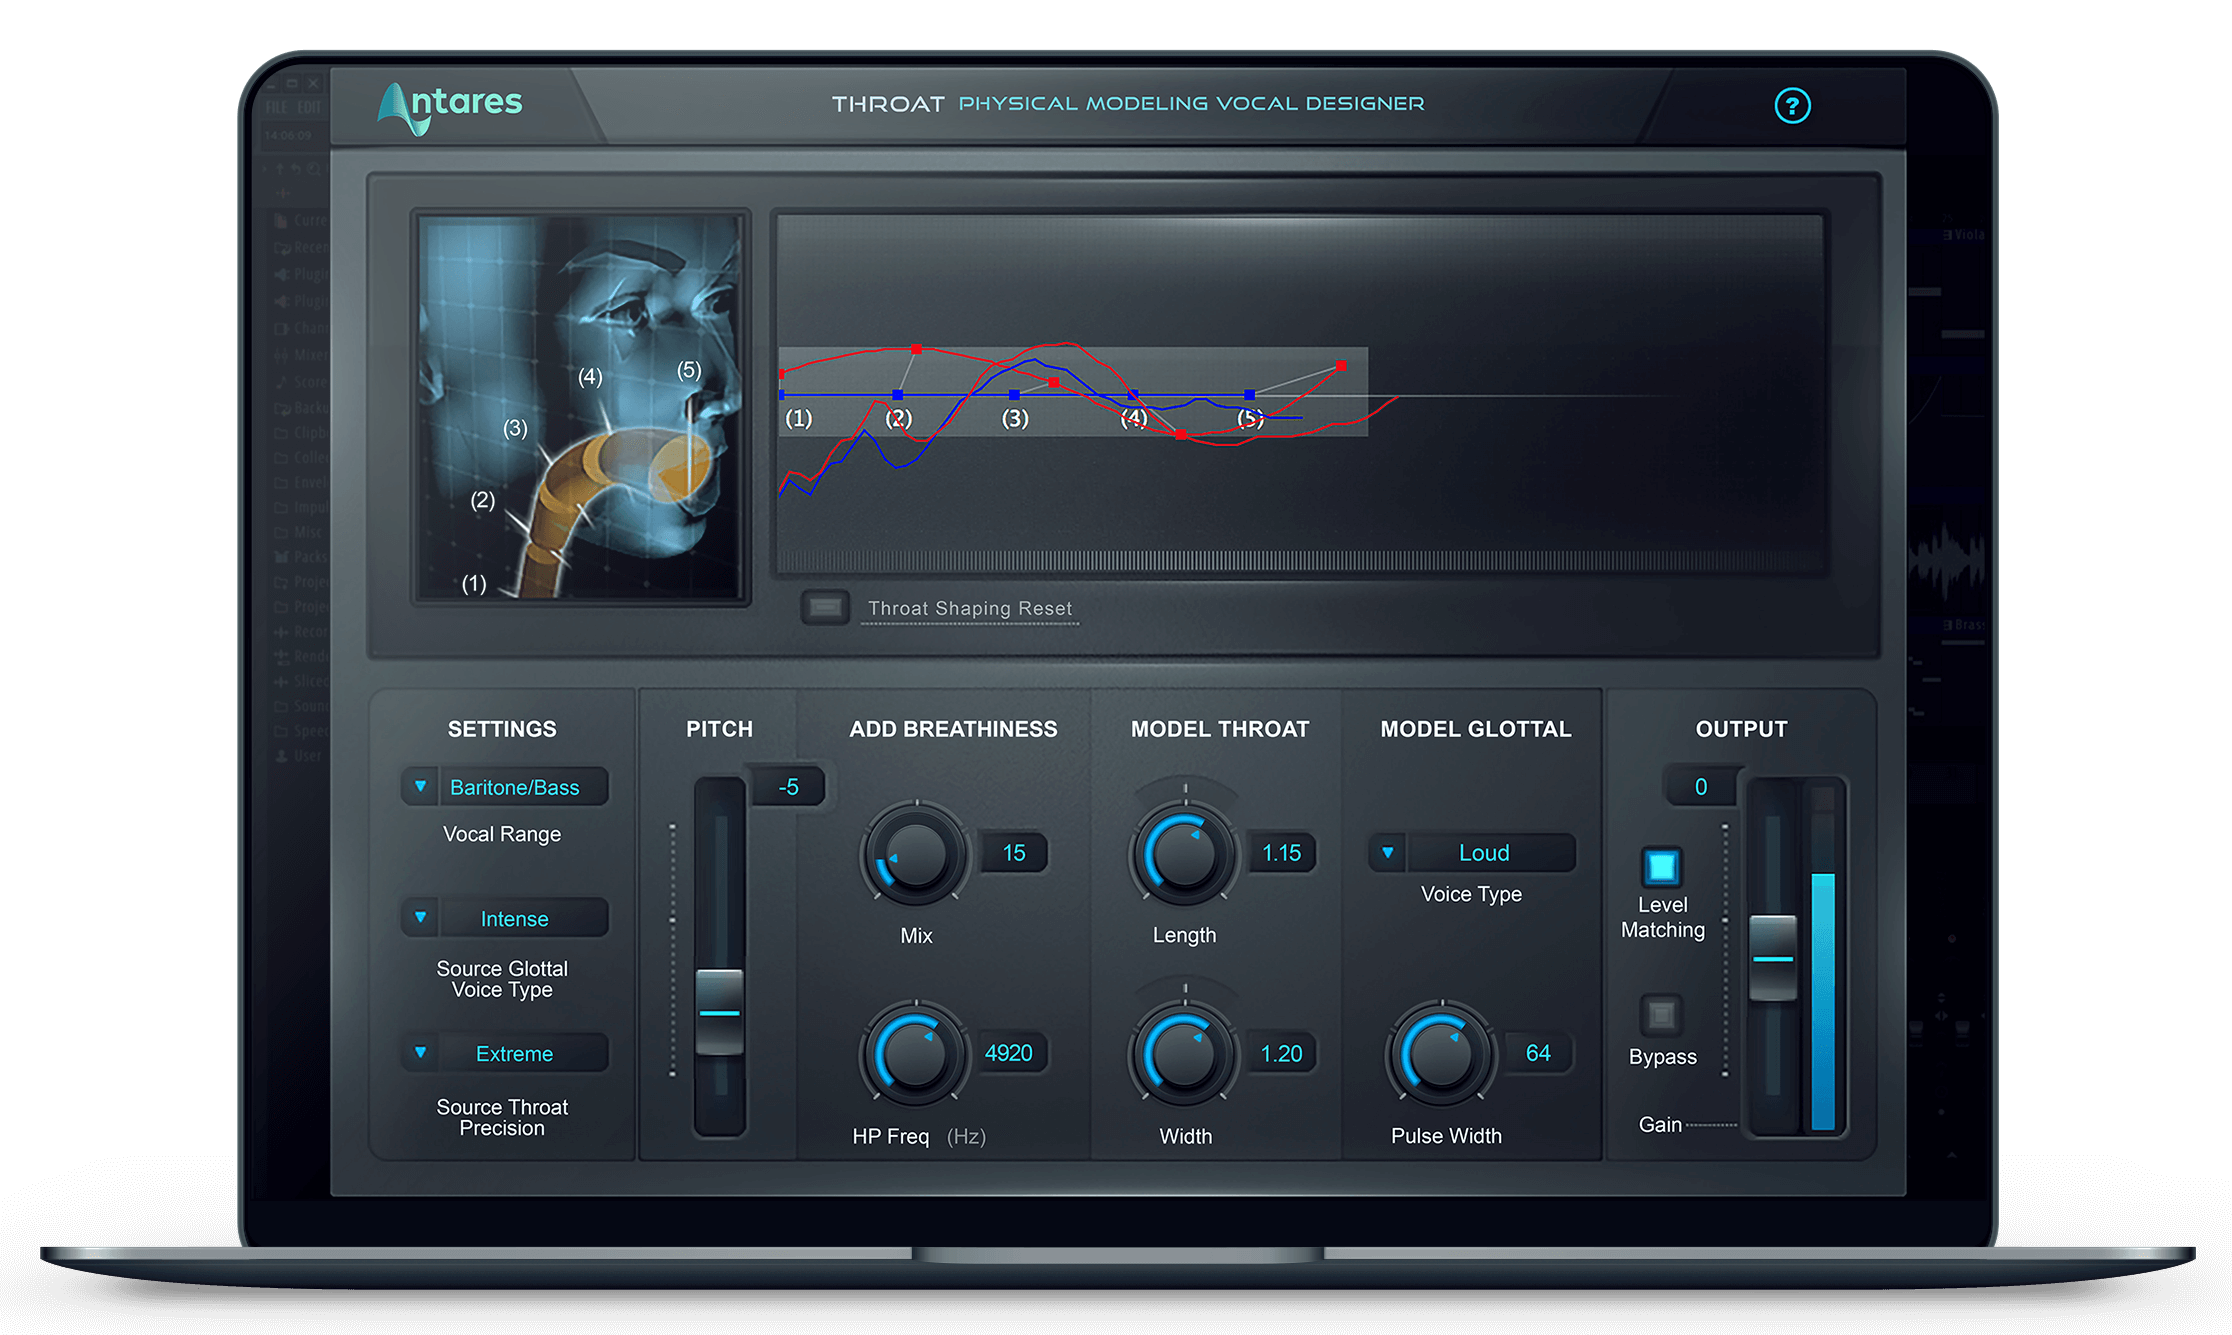 Antares | THROAT Evo Vocal Modeling Plug-in